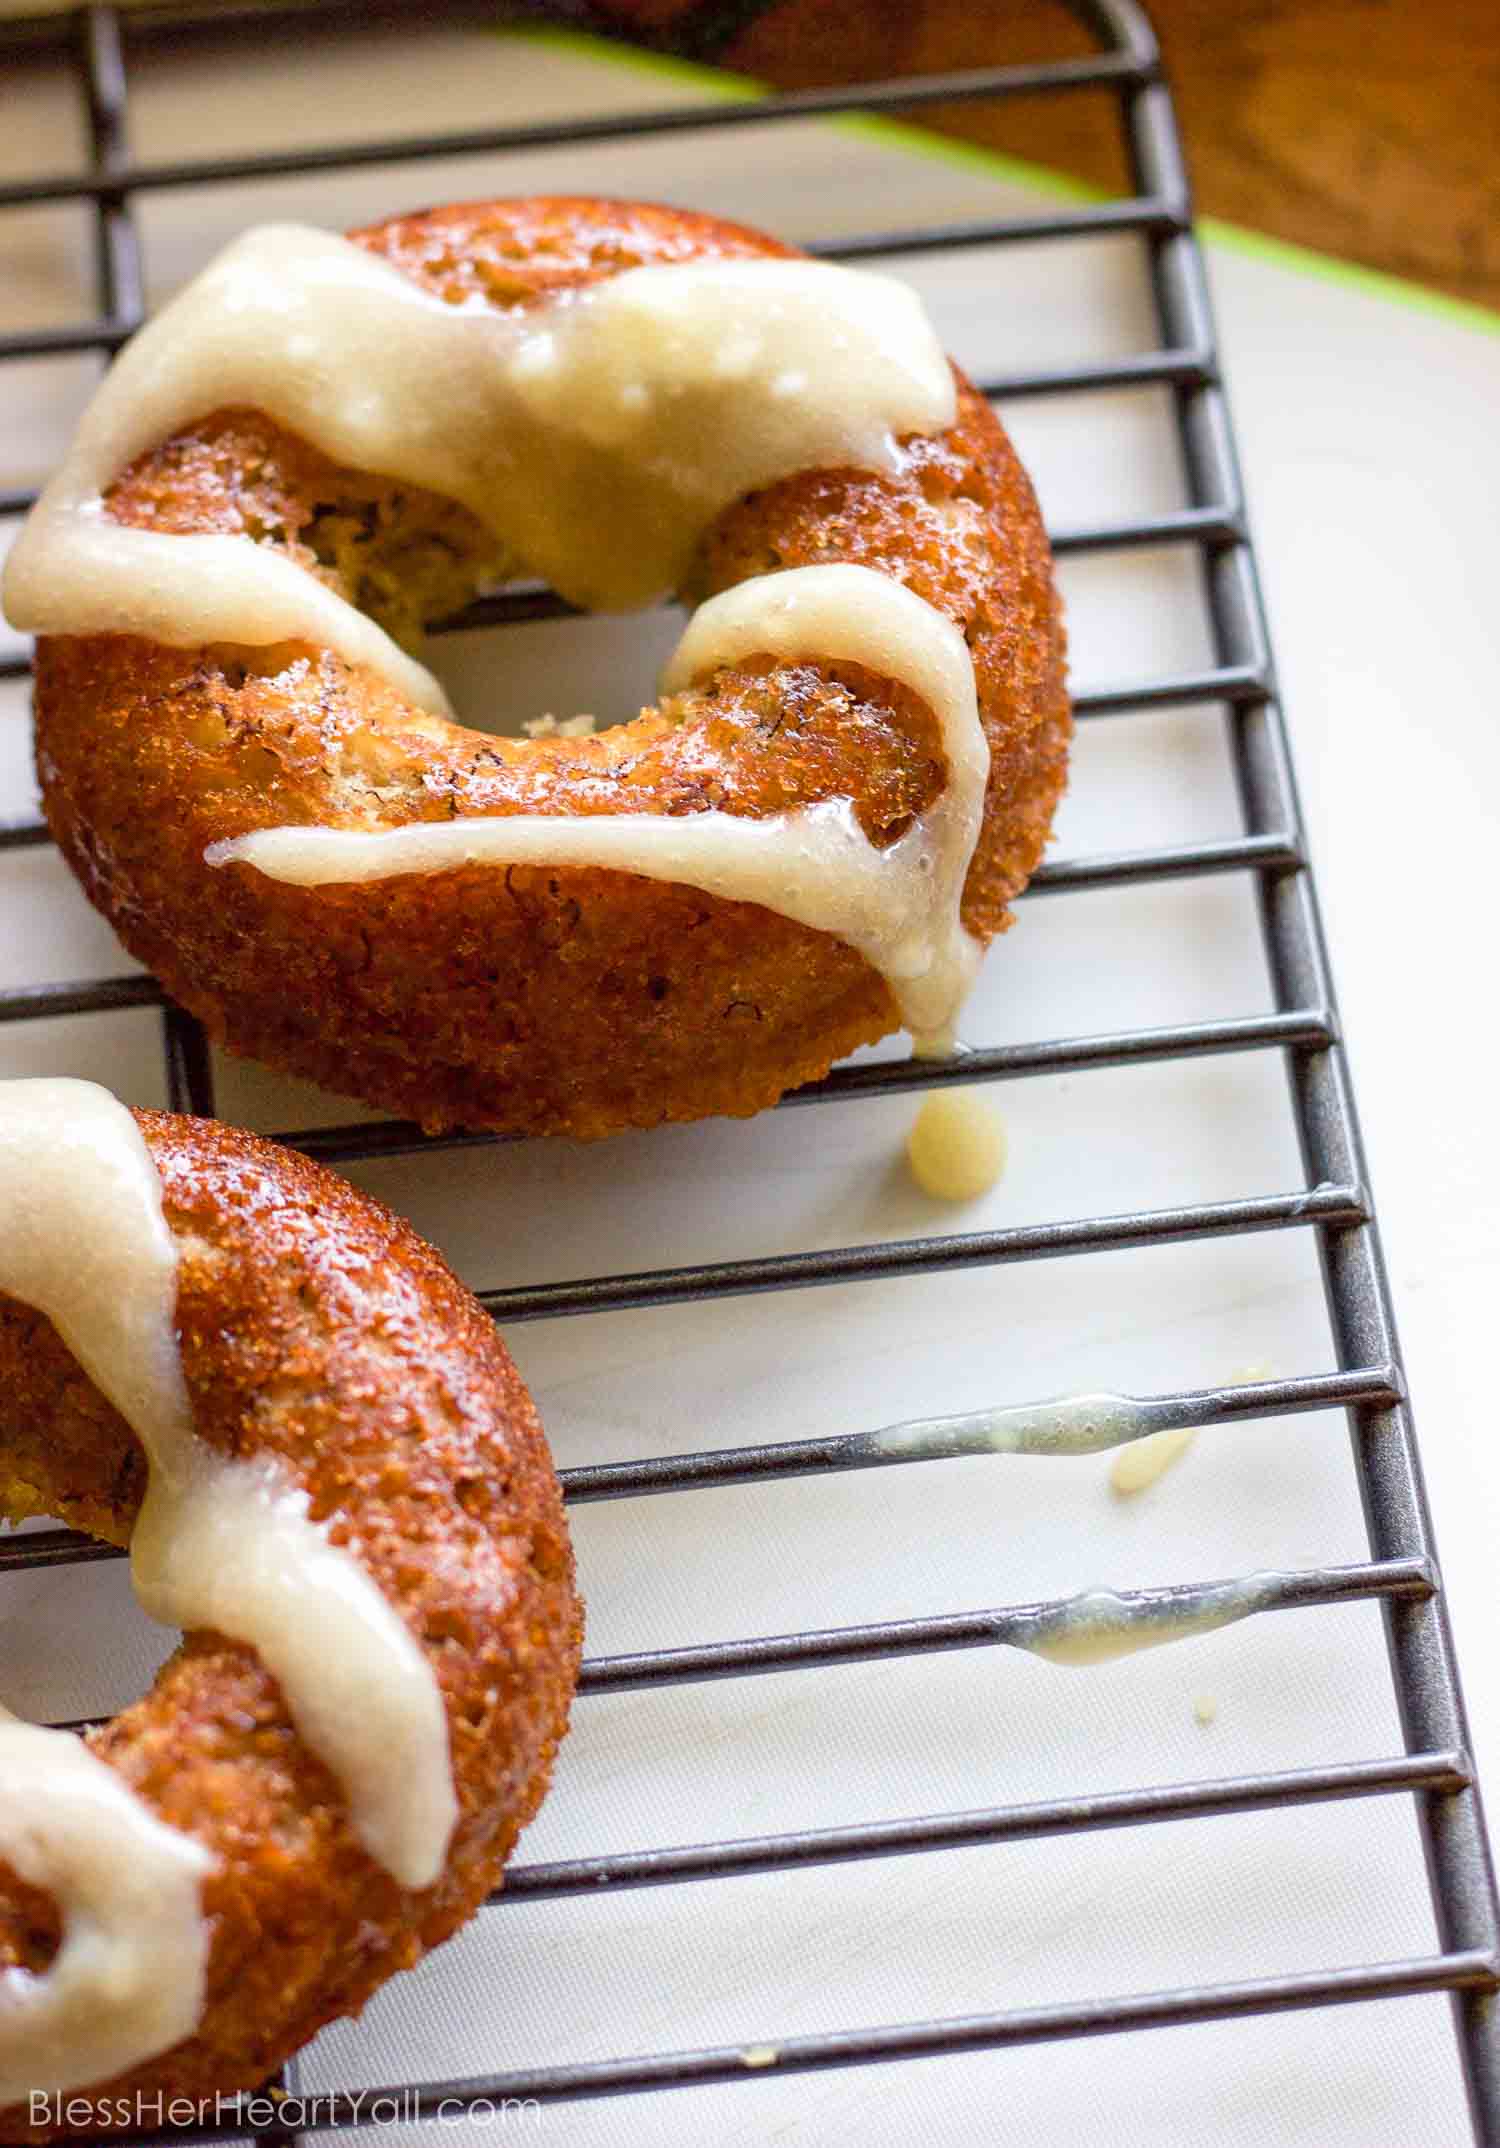 These gluten-free banana bread donuts are a great reason to wake up in the morning! Soft and moist banana bread is baked into fluffy donuts and then drizzled with an easy and quick honey cream cheese drizzle.